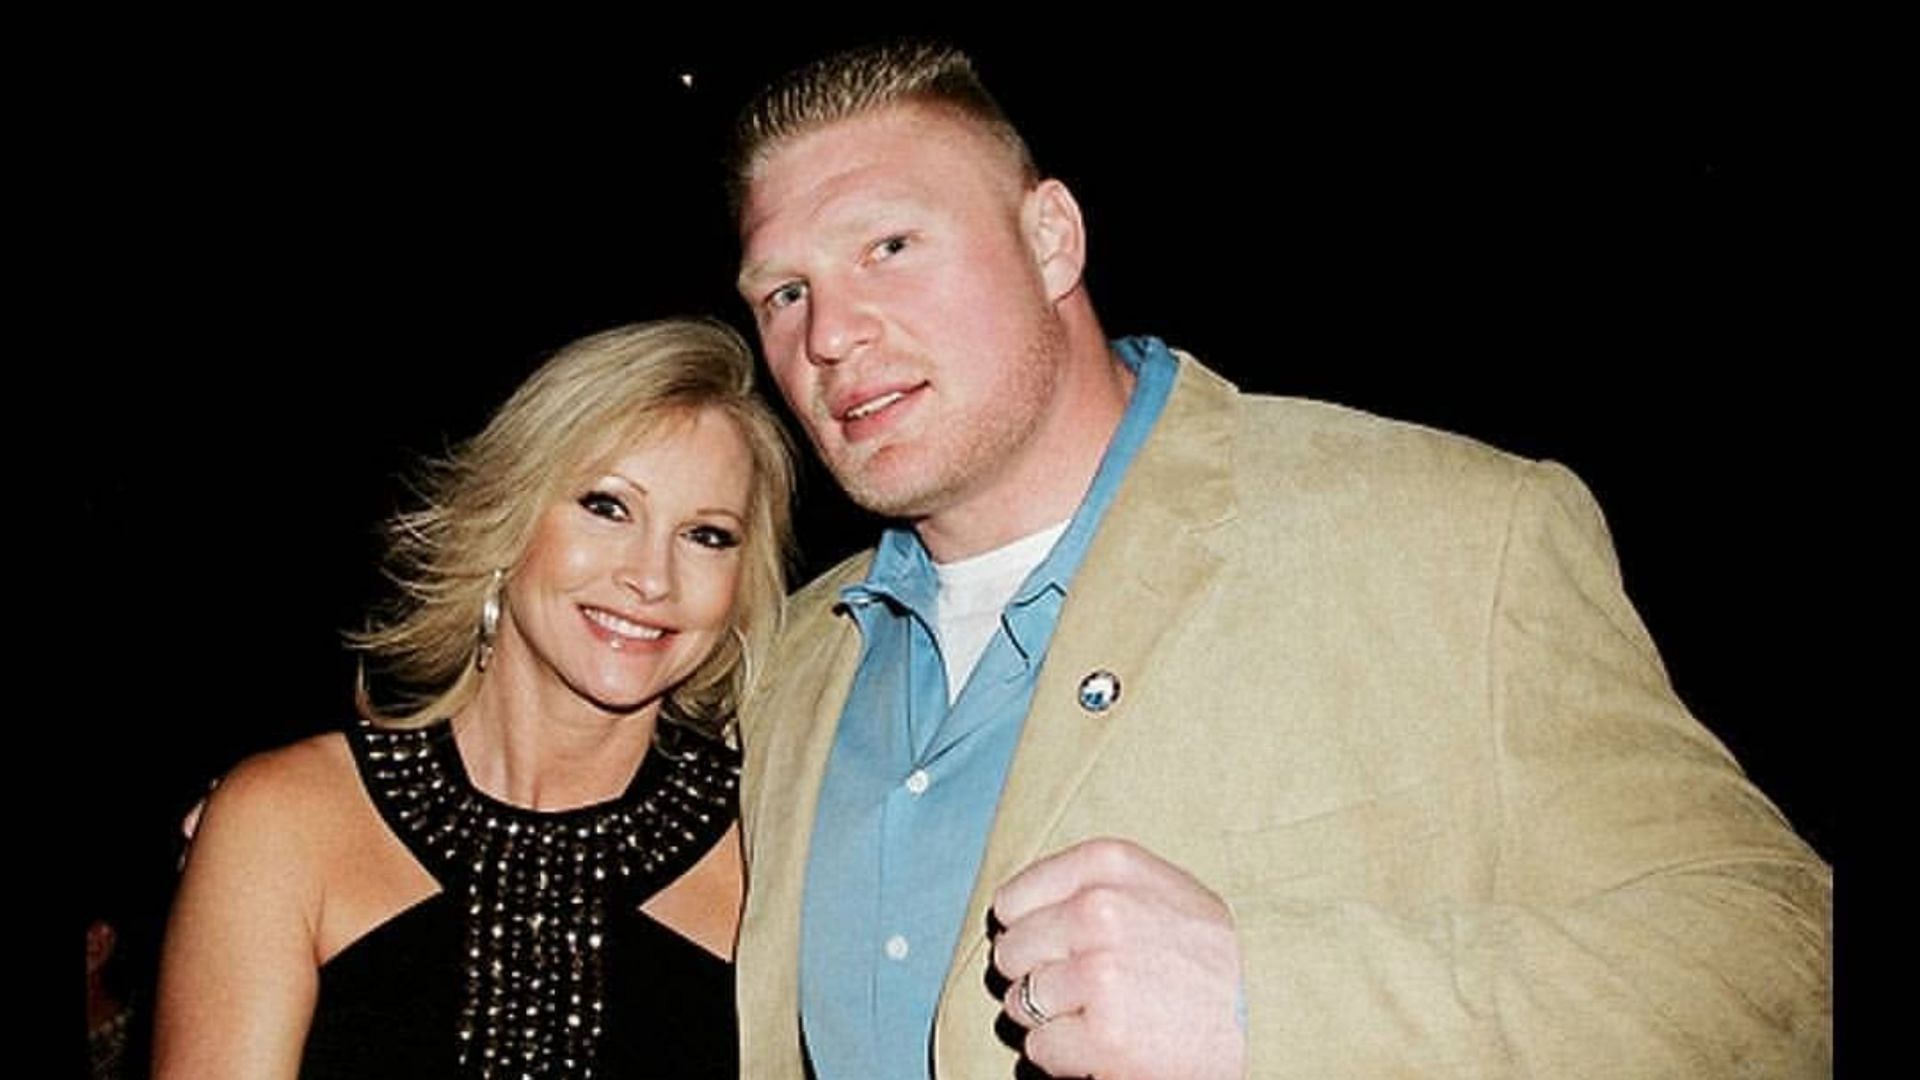 Brock Lesnar and Sable tied the knot in 2006